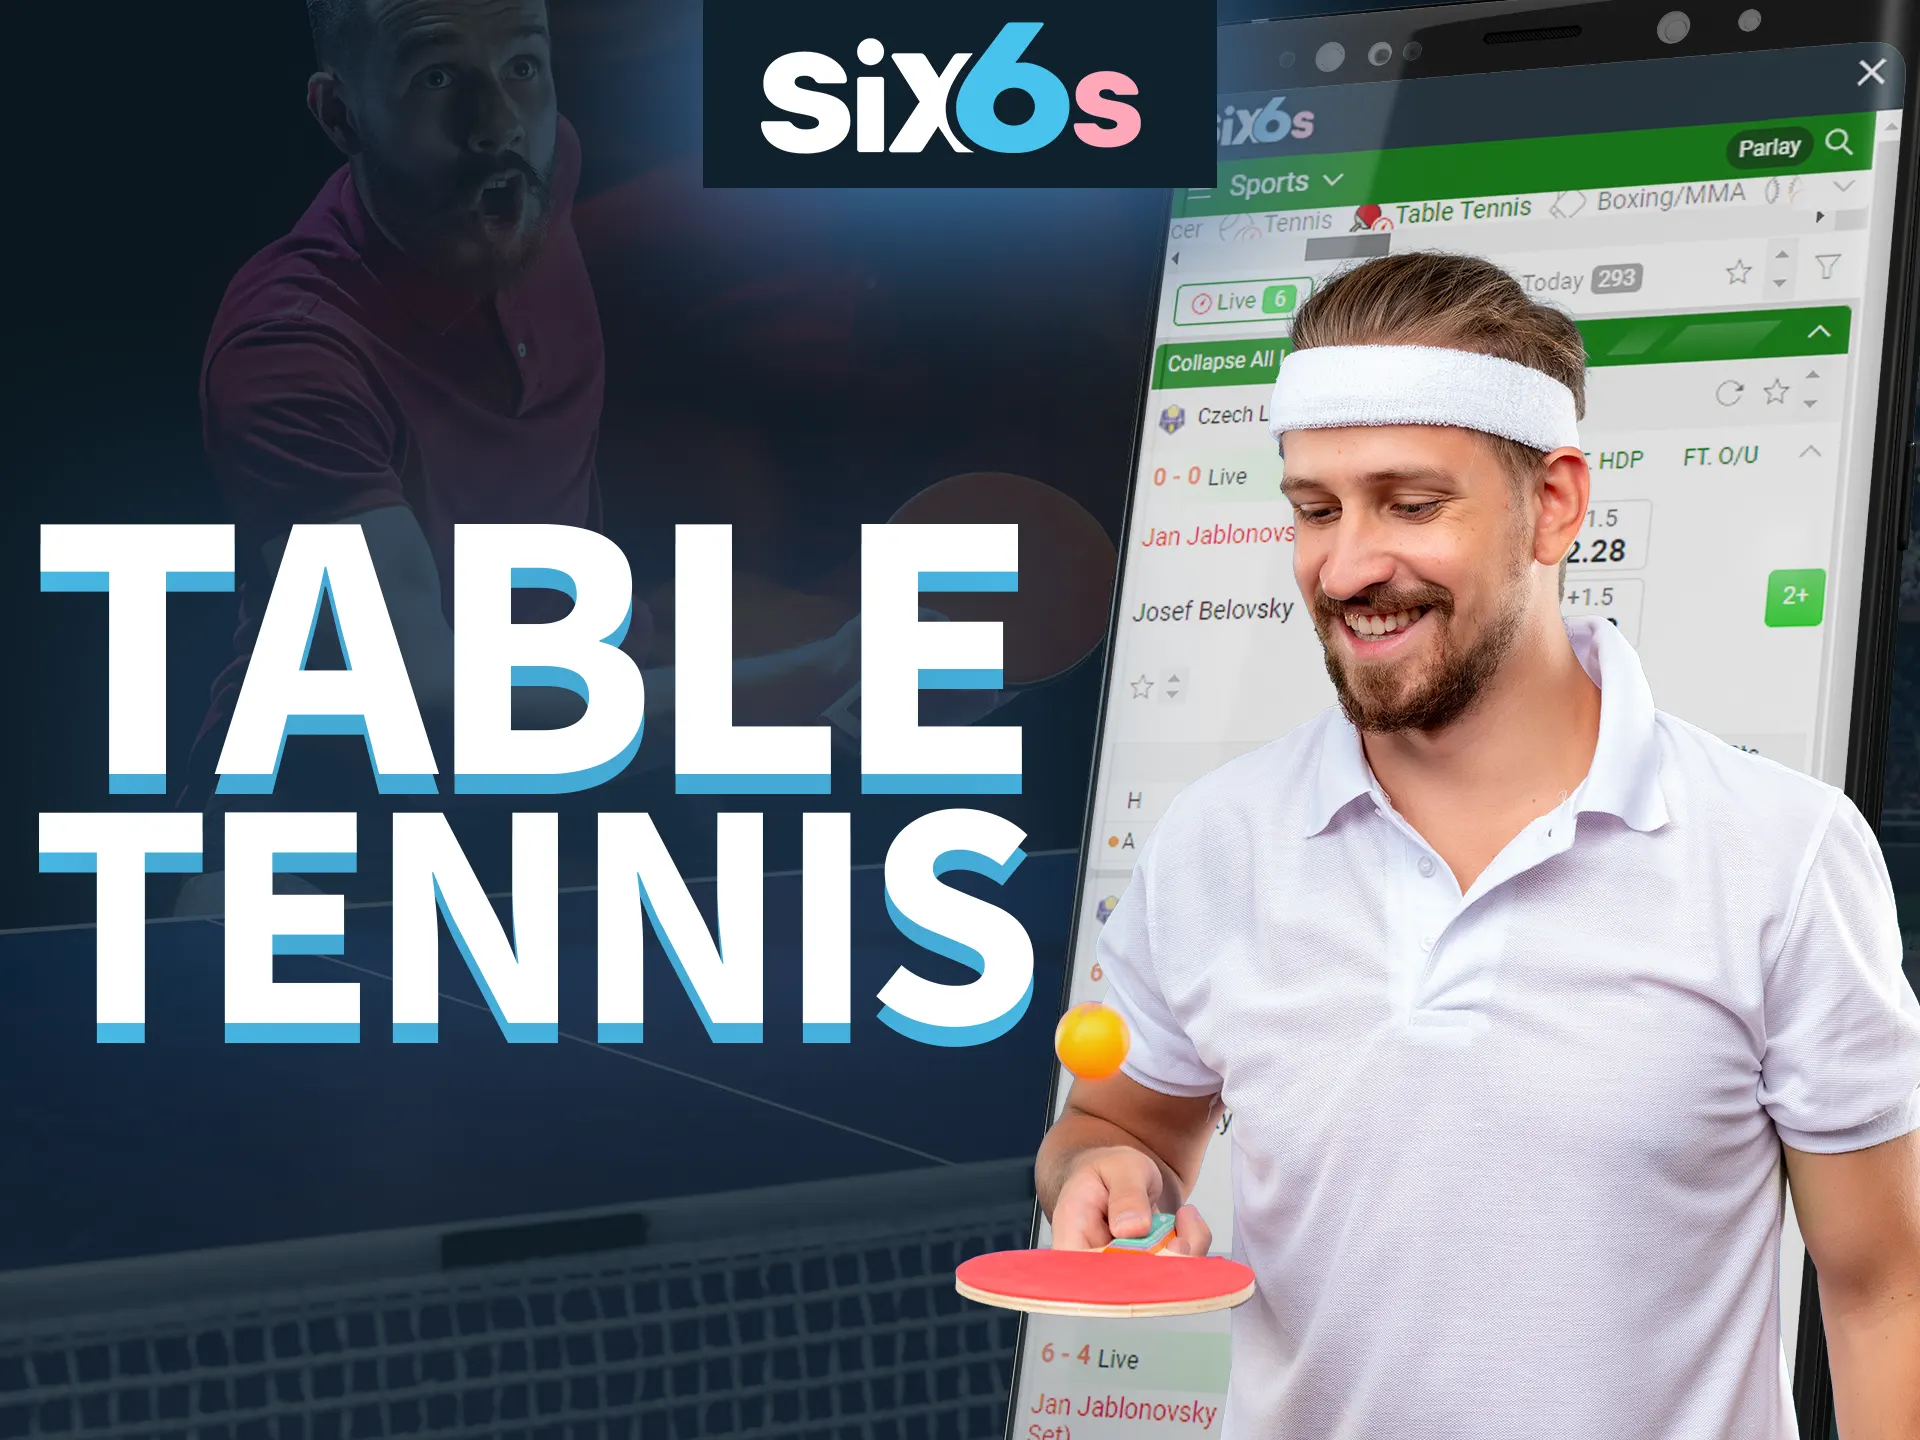 Bet on table tennis tournaments with Six6s.